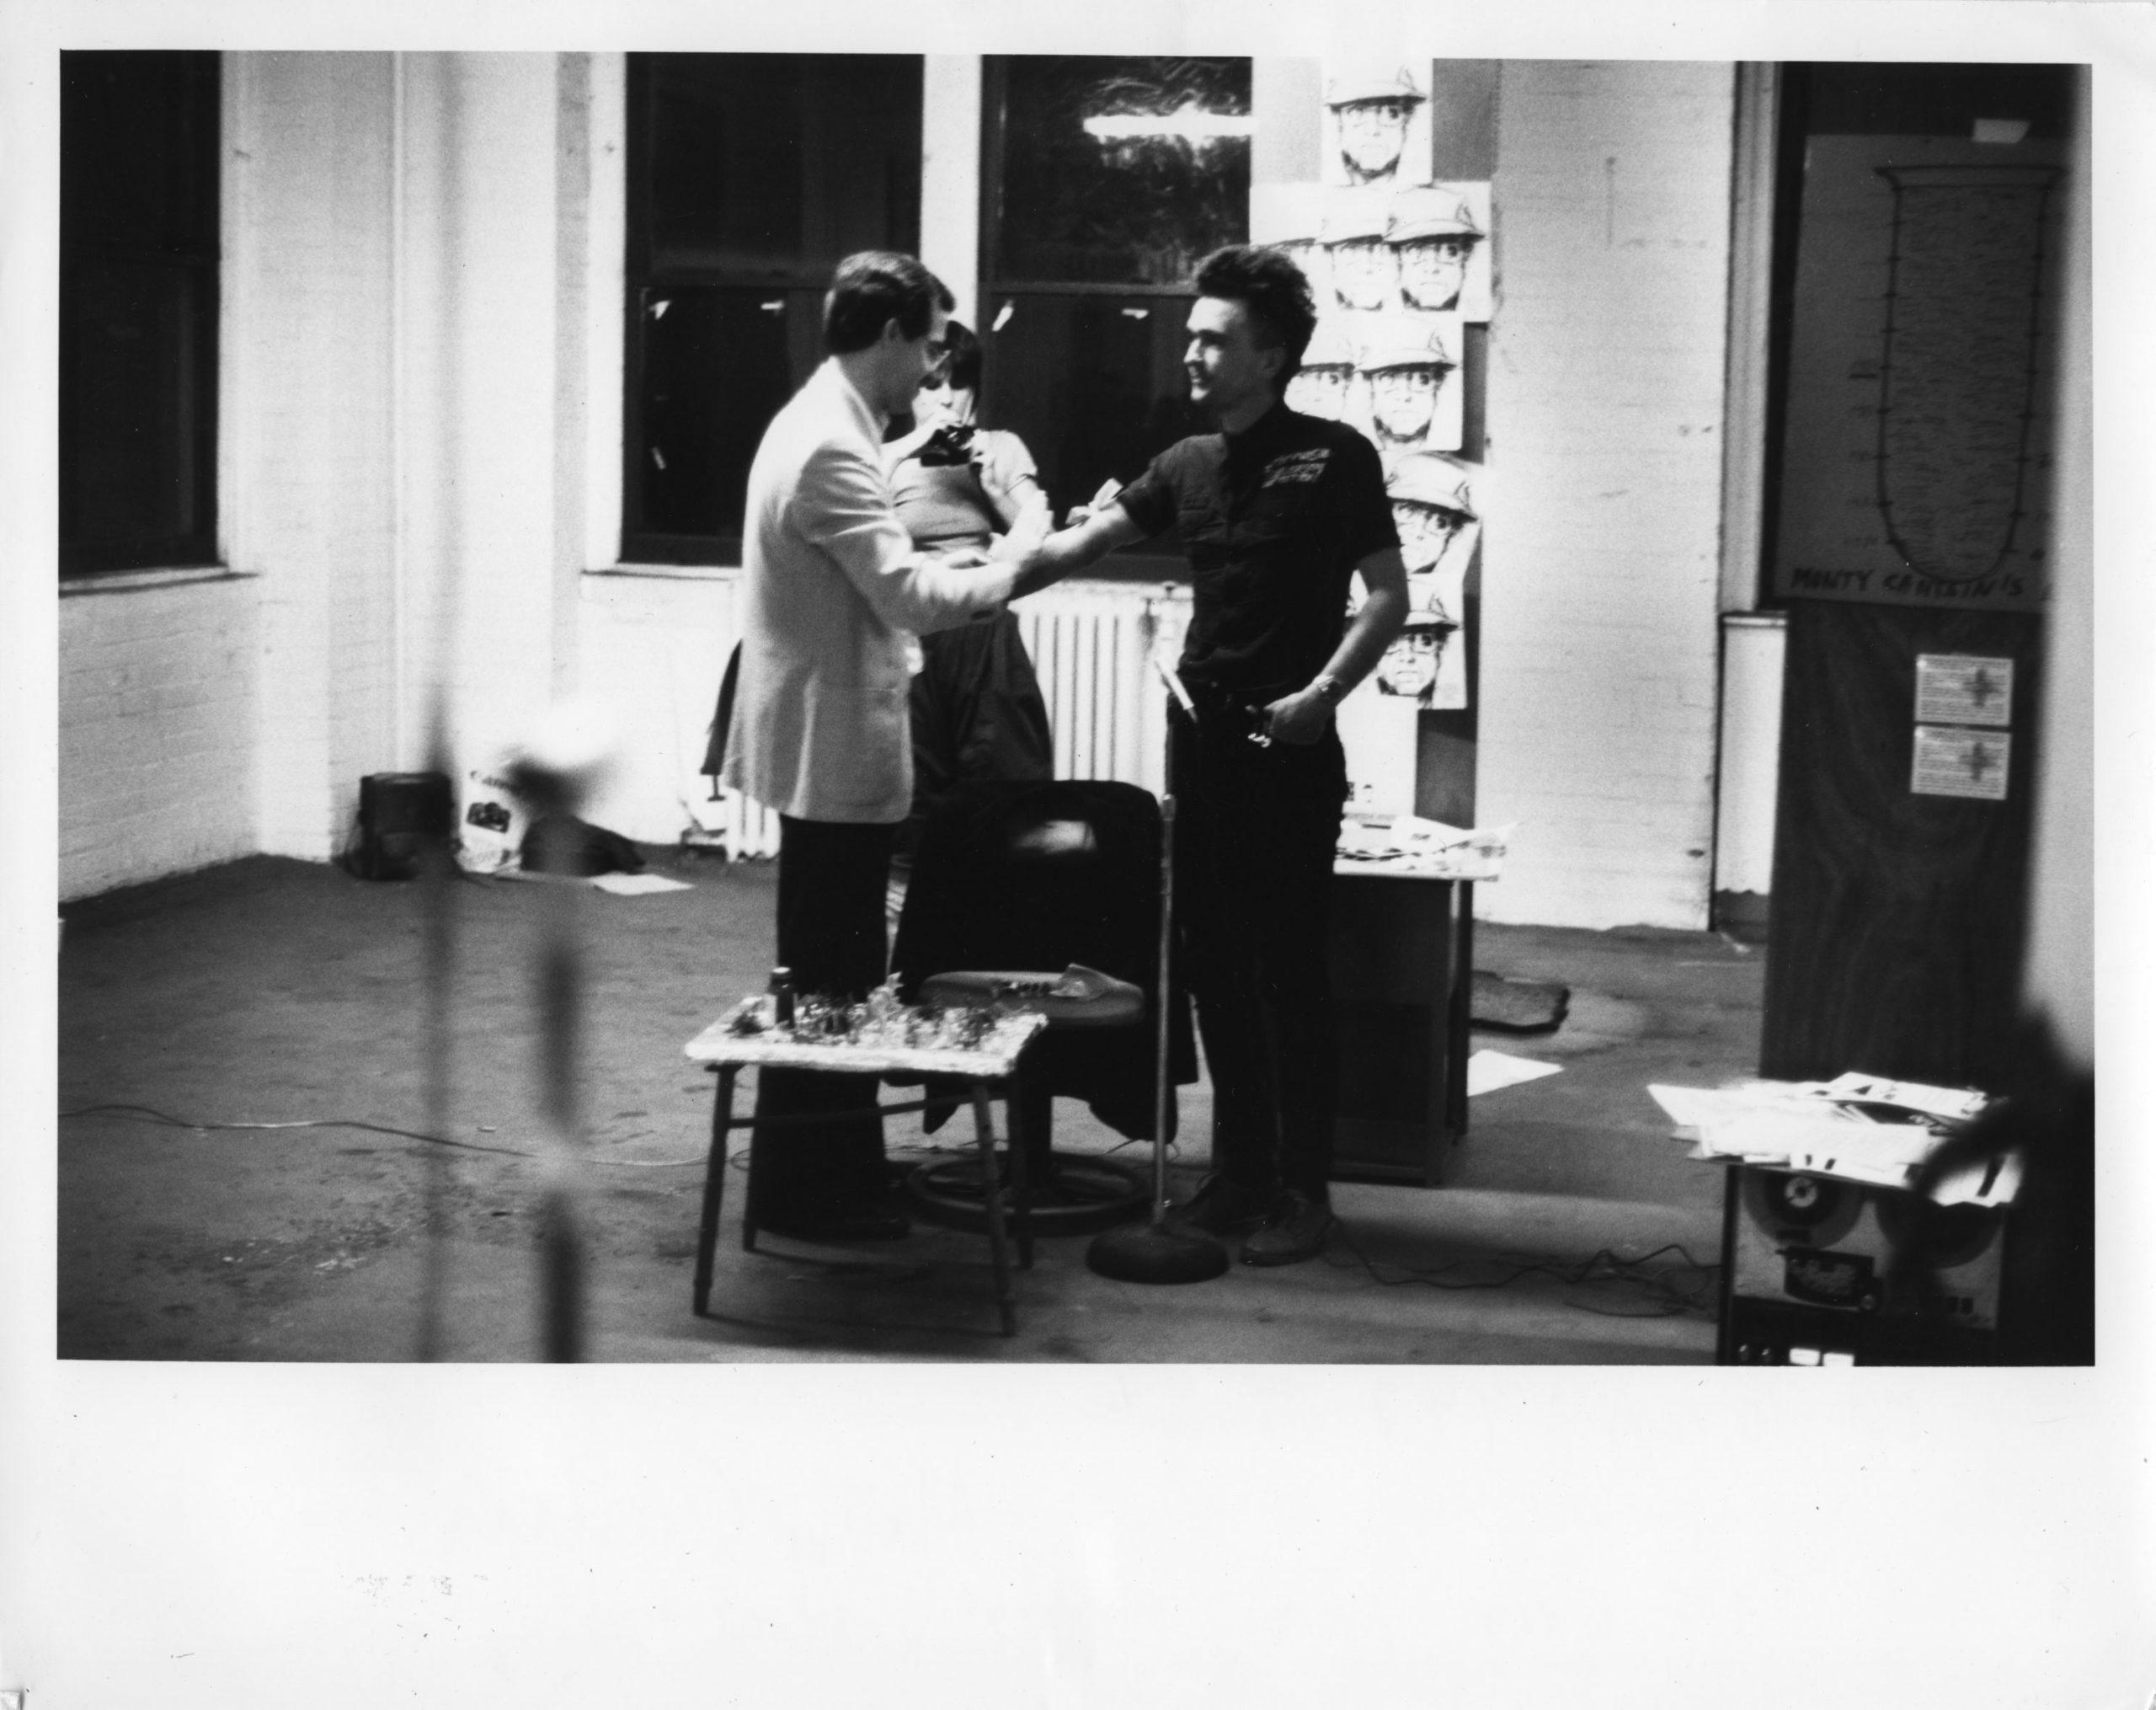 Old black and white photograph of three artists interacting in a studio